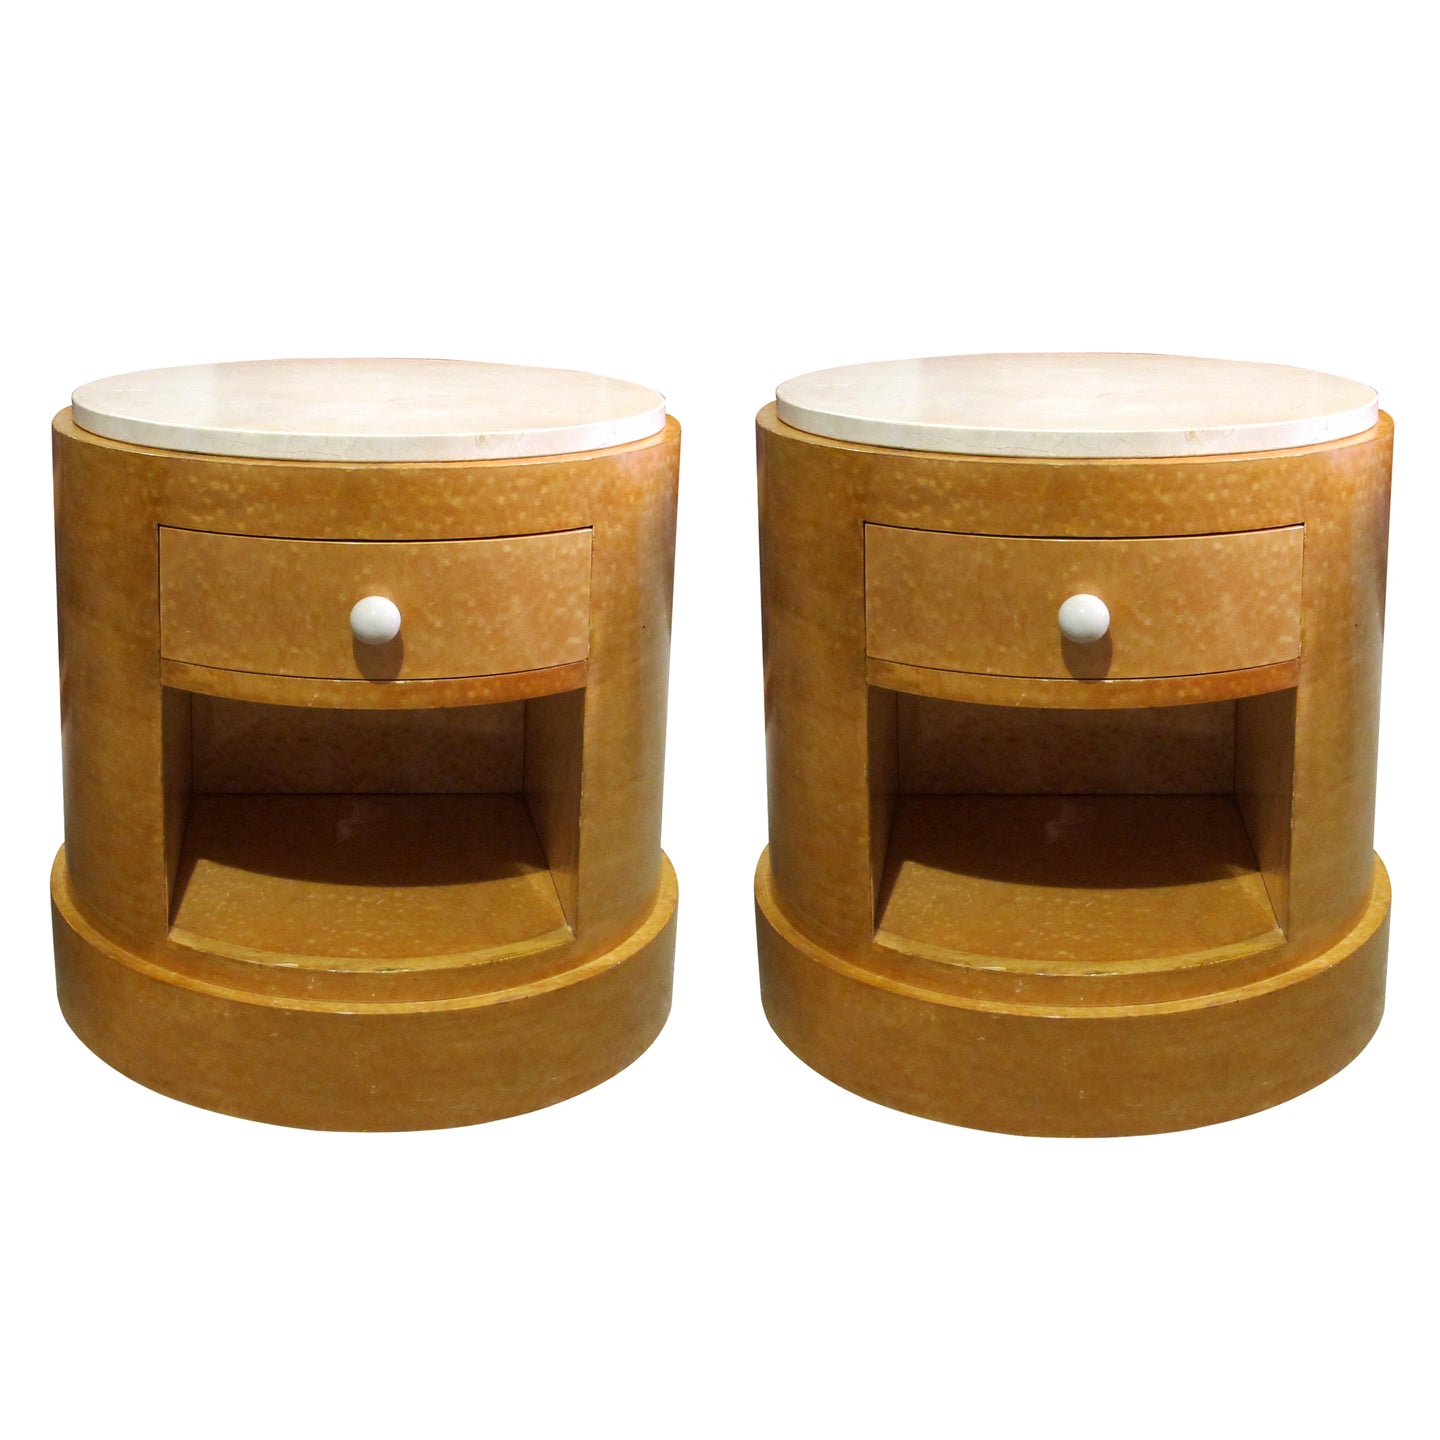 Mid-century Modern Pair of Cylindrical Side Table – Nightstands art Deco Style, English